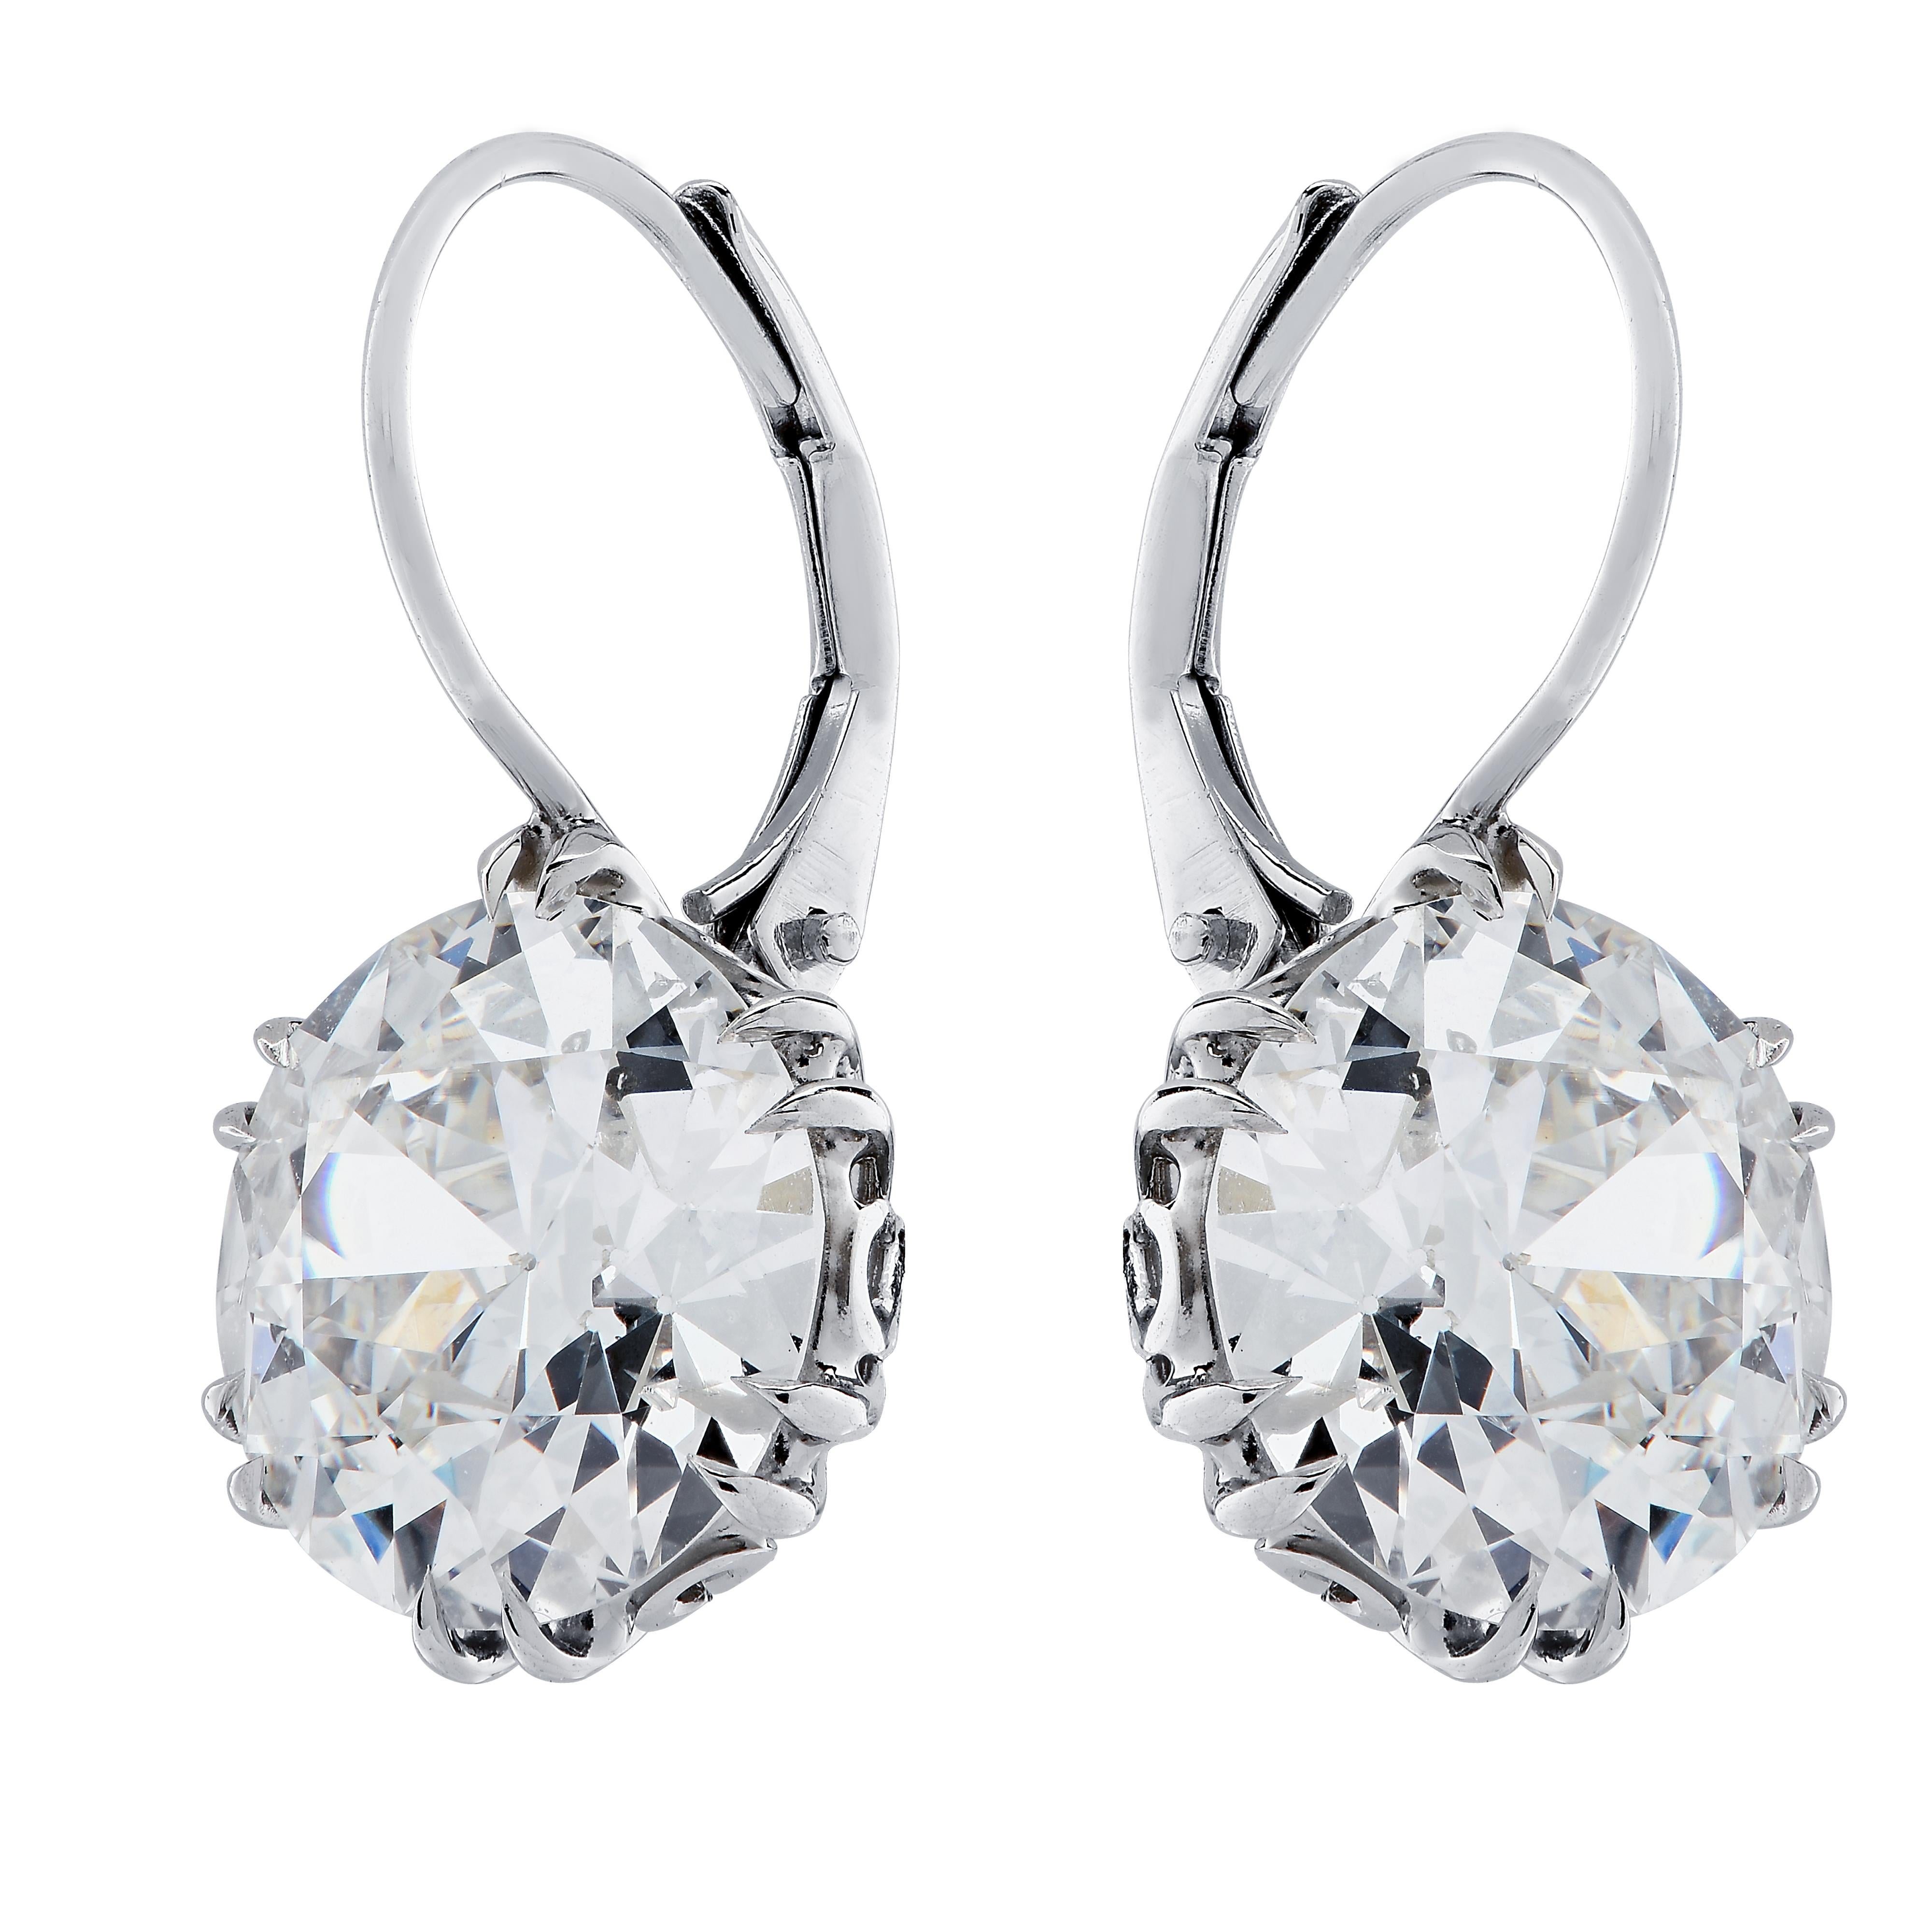 Handmade Platinum earrings featuring 2 Old European cut diamonds weighing 7.83 carats total, F-G color SI clarity. . These stunning earrings measure 20.15 mm in length and 11 mm in width. They weigh 5.9 grams

Our pieces are all accompanied by an